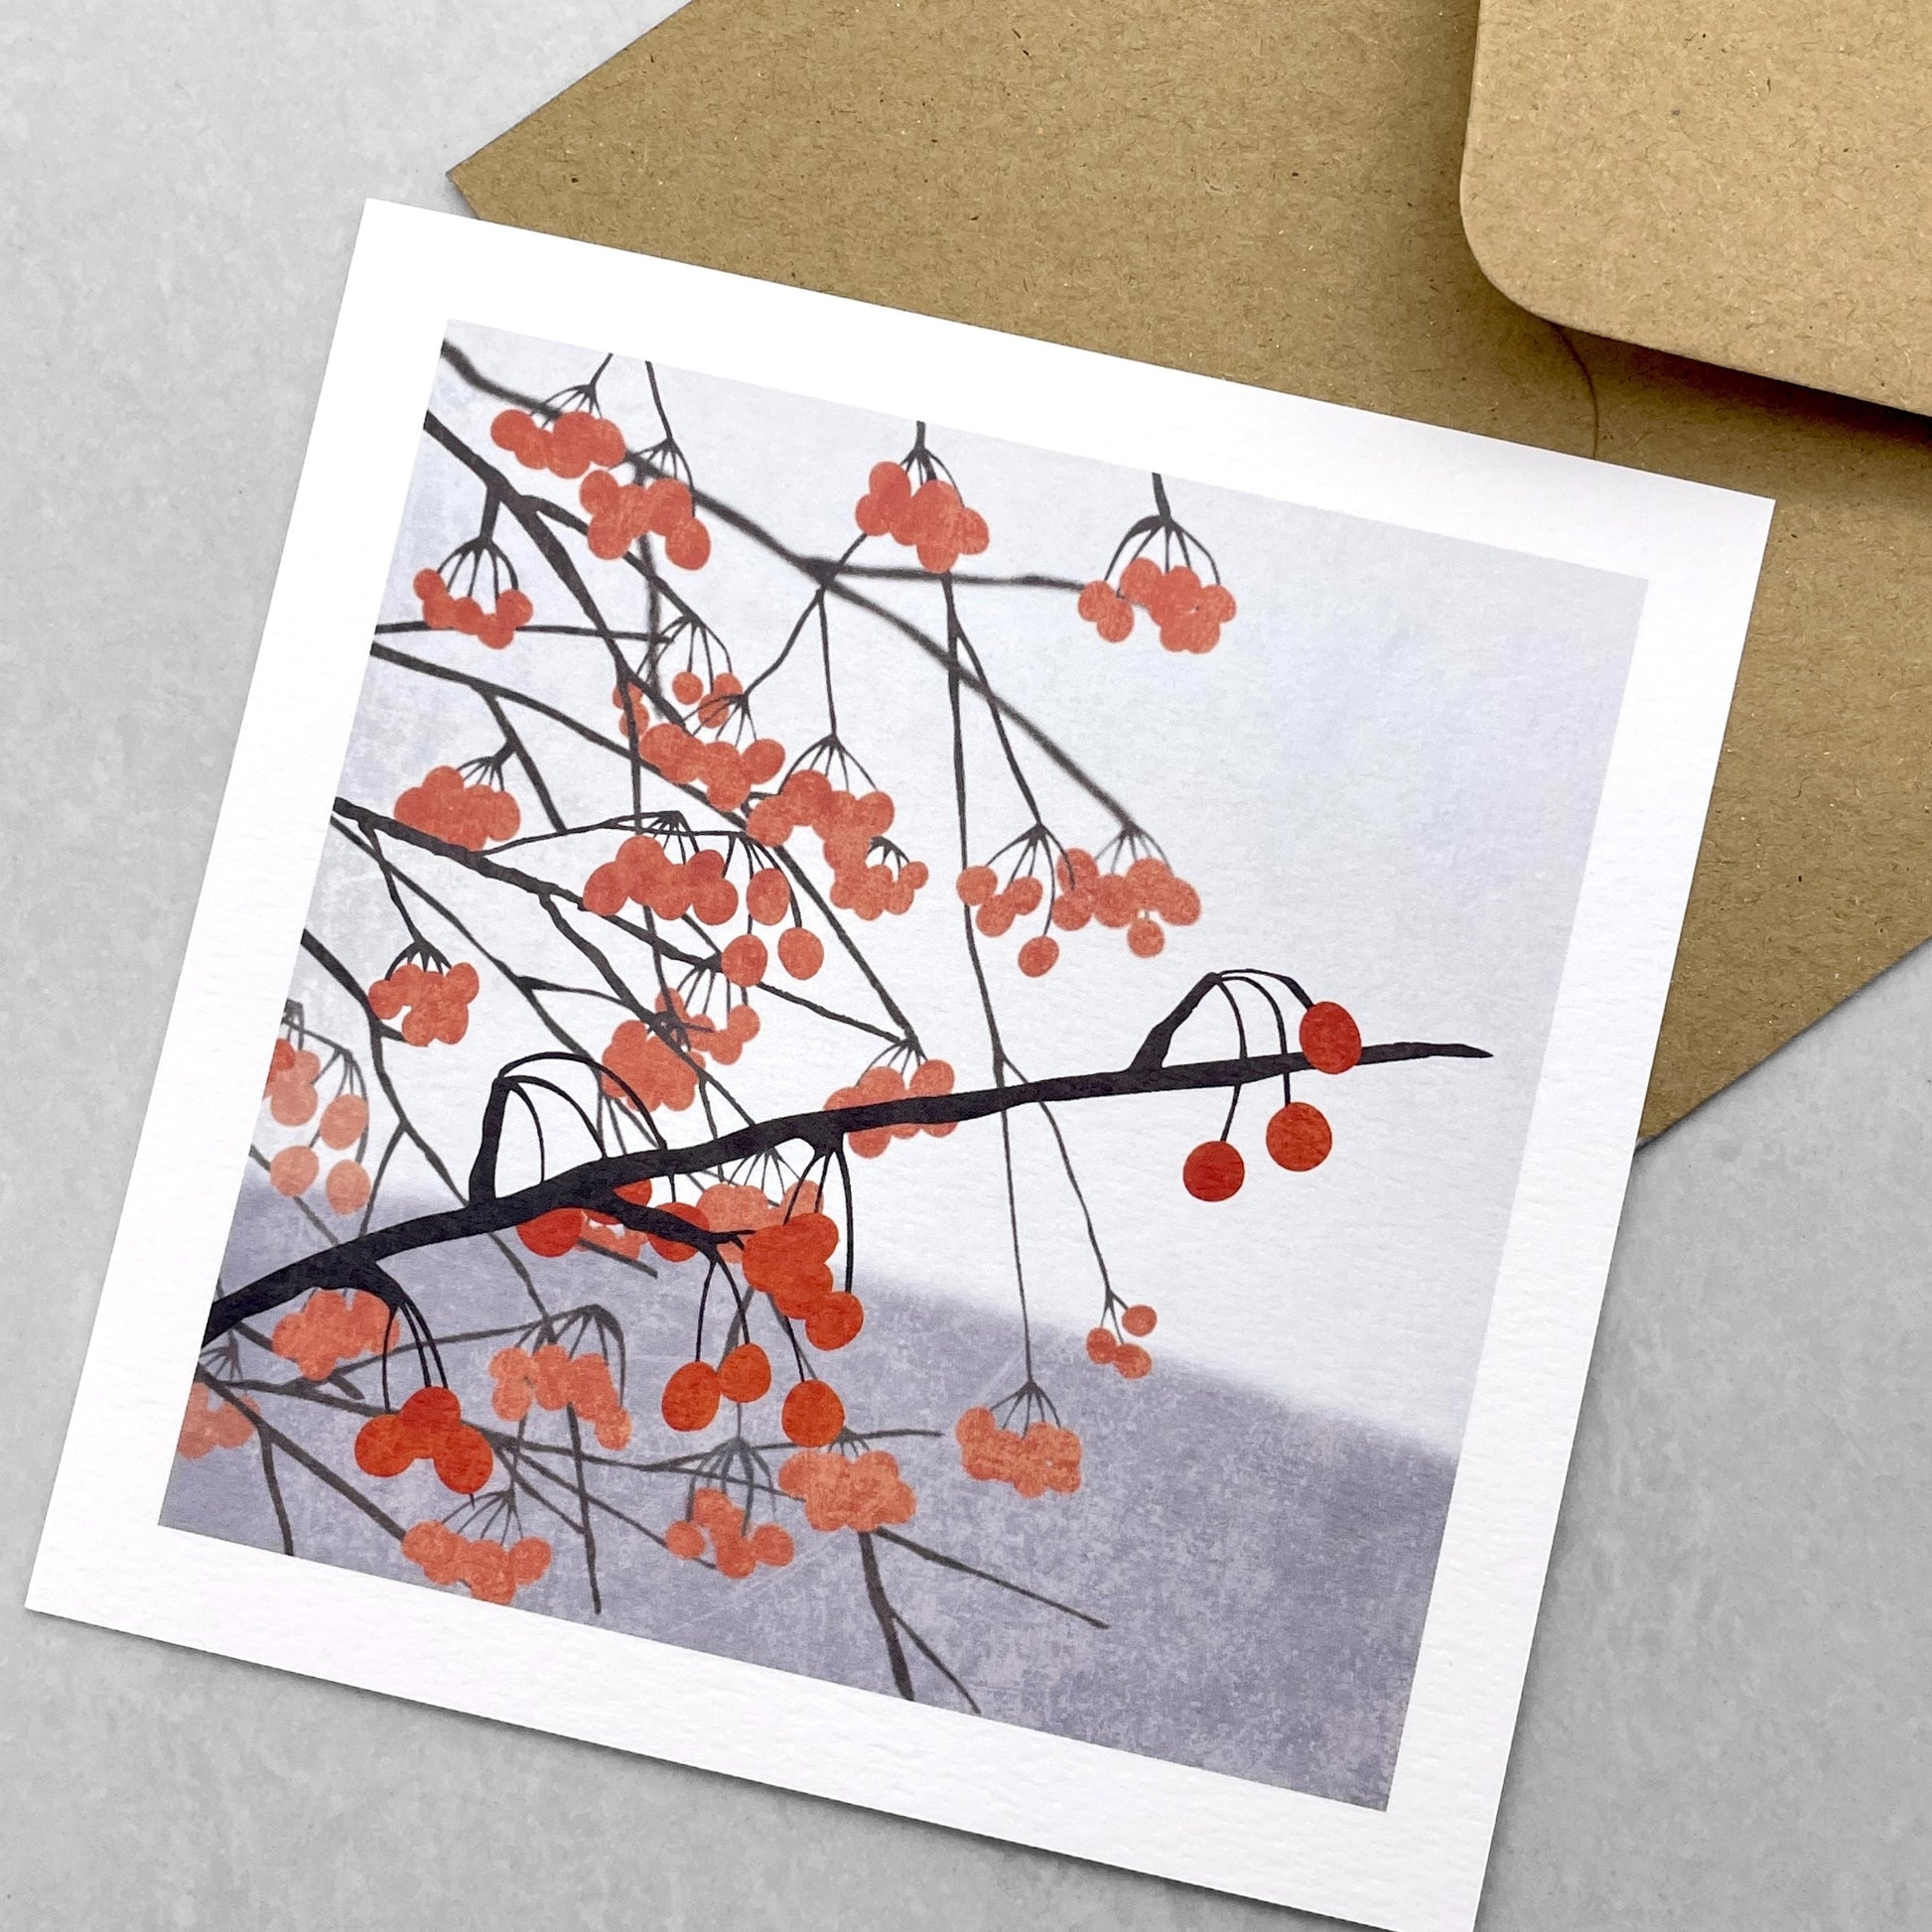 A greetings card of red winter berries, part of a 4 card pack by Ruth Thorp studio